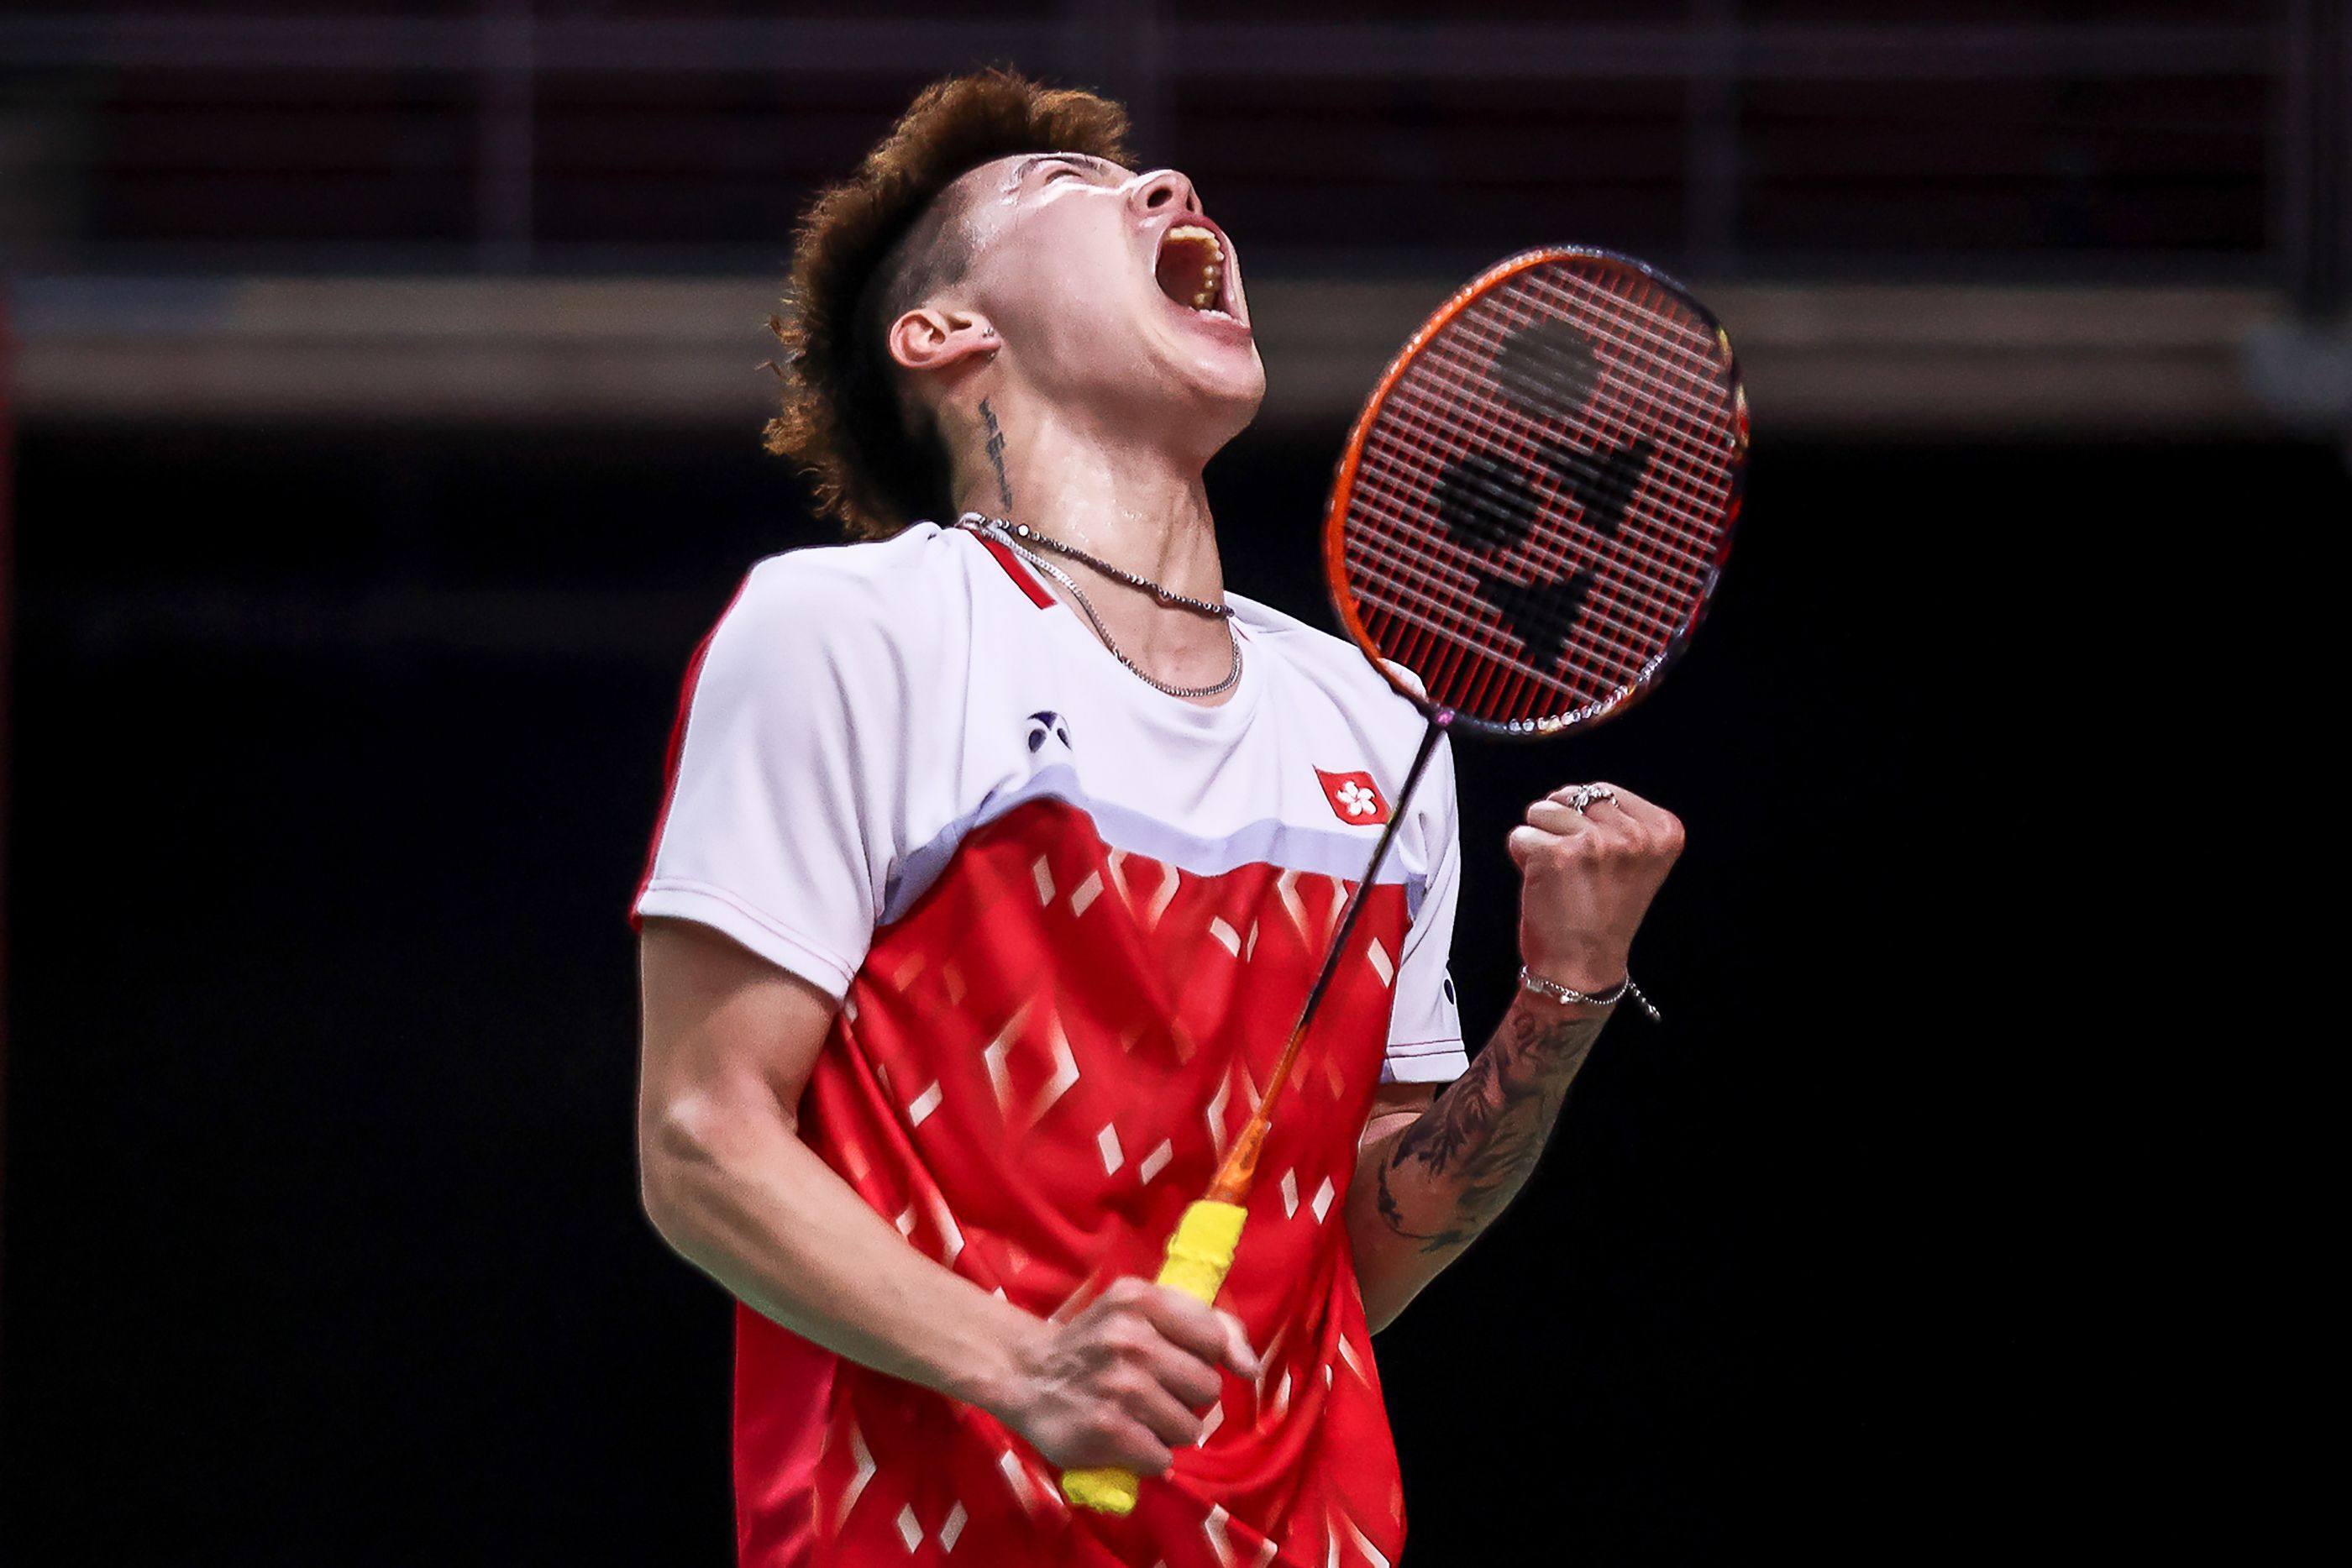 Lee Cheuk-yiu is part of the Hong Kong squad for next week’s Asia Team Championships in Malaysia . Photo: AFP/Badminton Association if Thailand